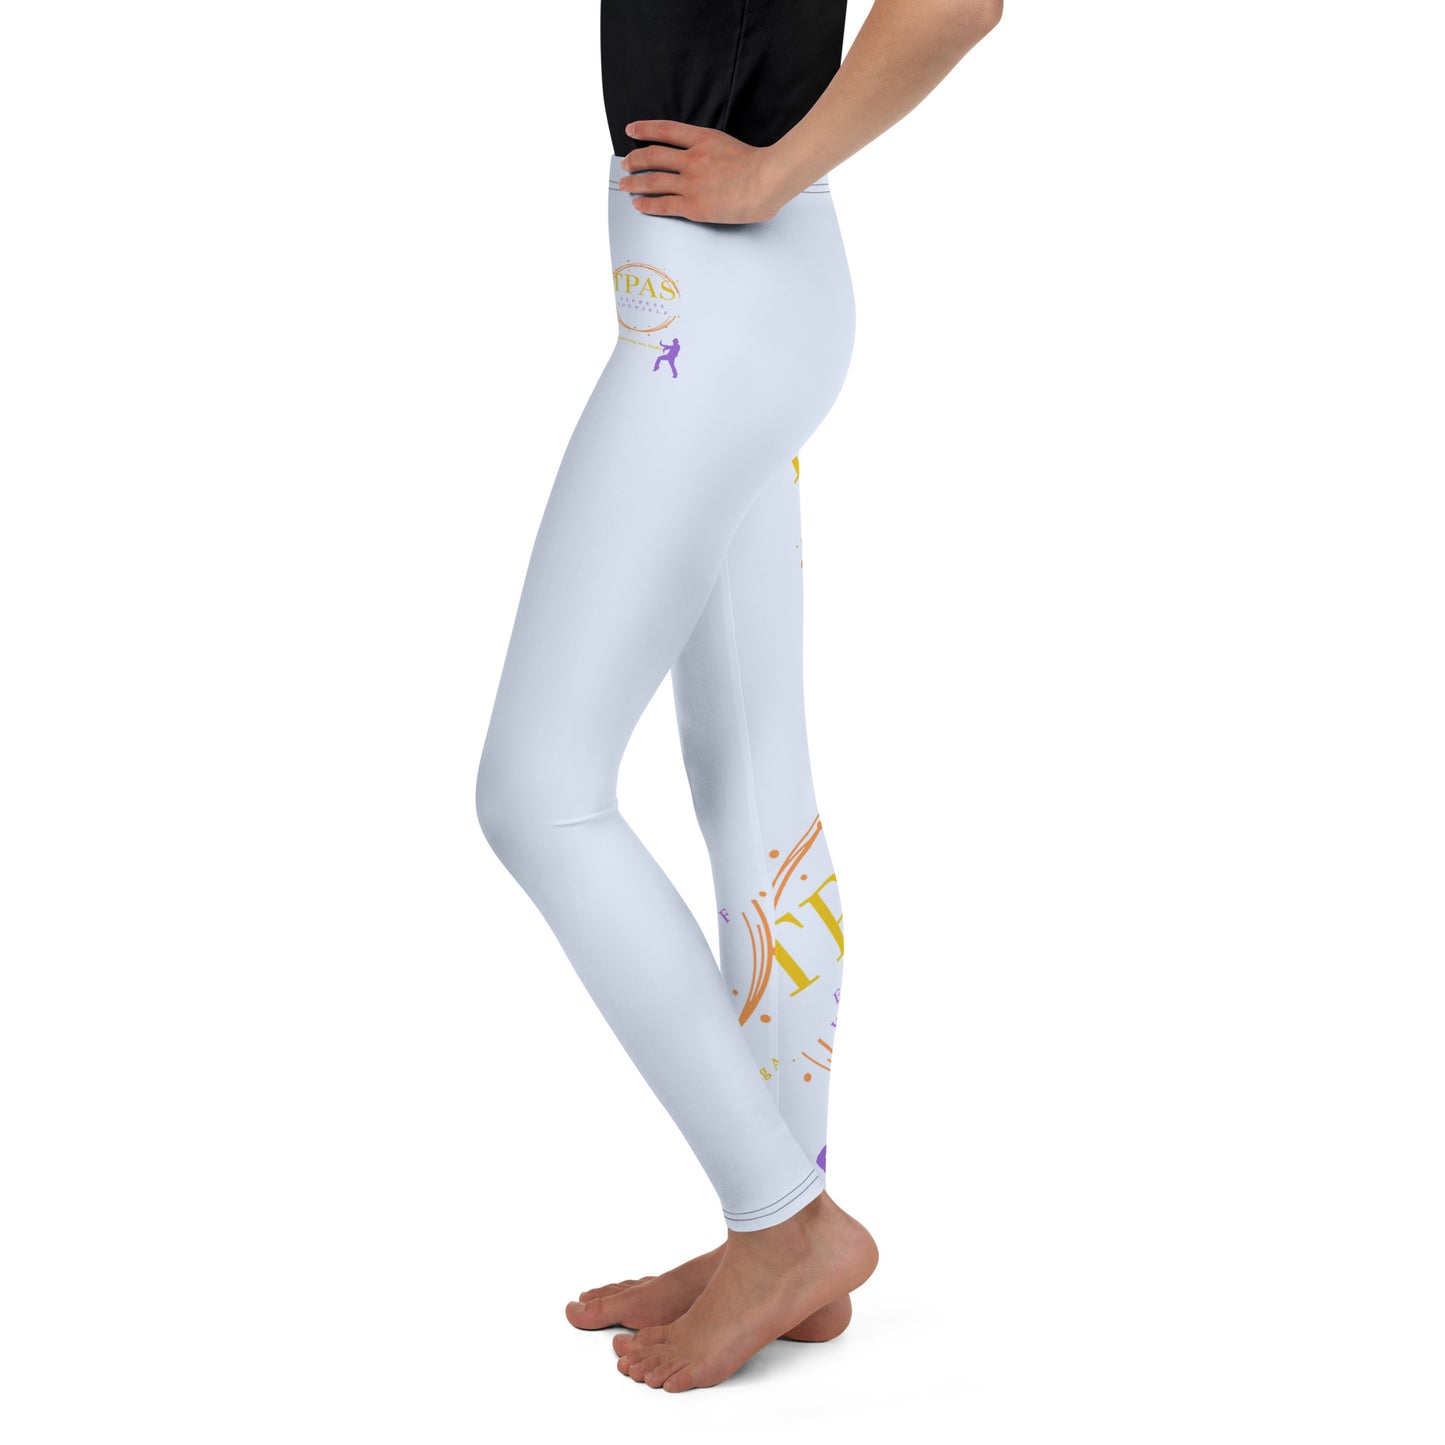 TPAS Competition Team Youth Leggings (Sizes 8-16)